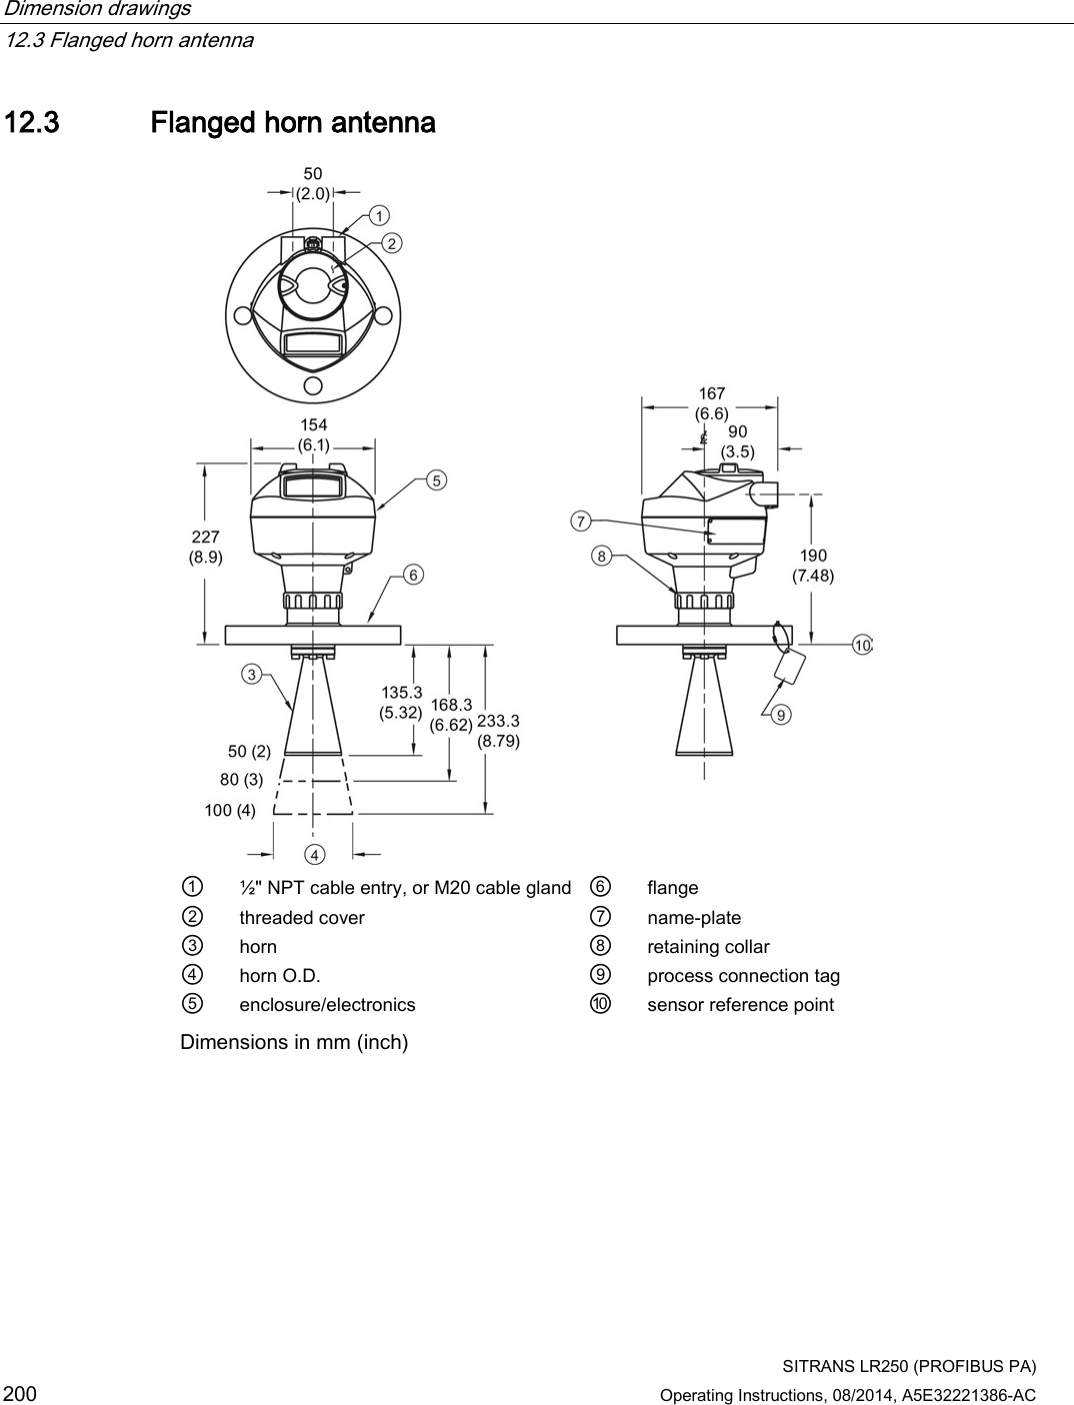 Dimension drawings   12.3 Flanged horn antenna  SITRANS LR250 (PROFIBUS PA) 200 Operating Instructions, 08/2014, A5E32221386-AC 12.3 Flanged horn antenna  ① ½&quot; NPT cable entry, or M20 cable gland ⑥ flange ② threaded cover ⑦ name-plate ③ horn ⑧ retaining collar ④ horn O.D. ⑨ process connection tag ⑤ enclosure/electronics ⑩ sensor reference point Dimensions in mm (inch) 